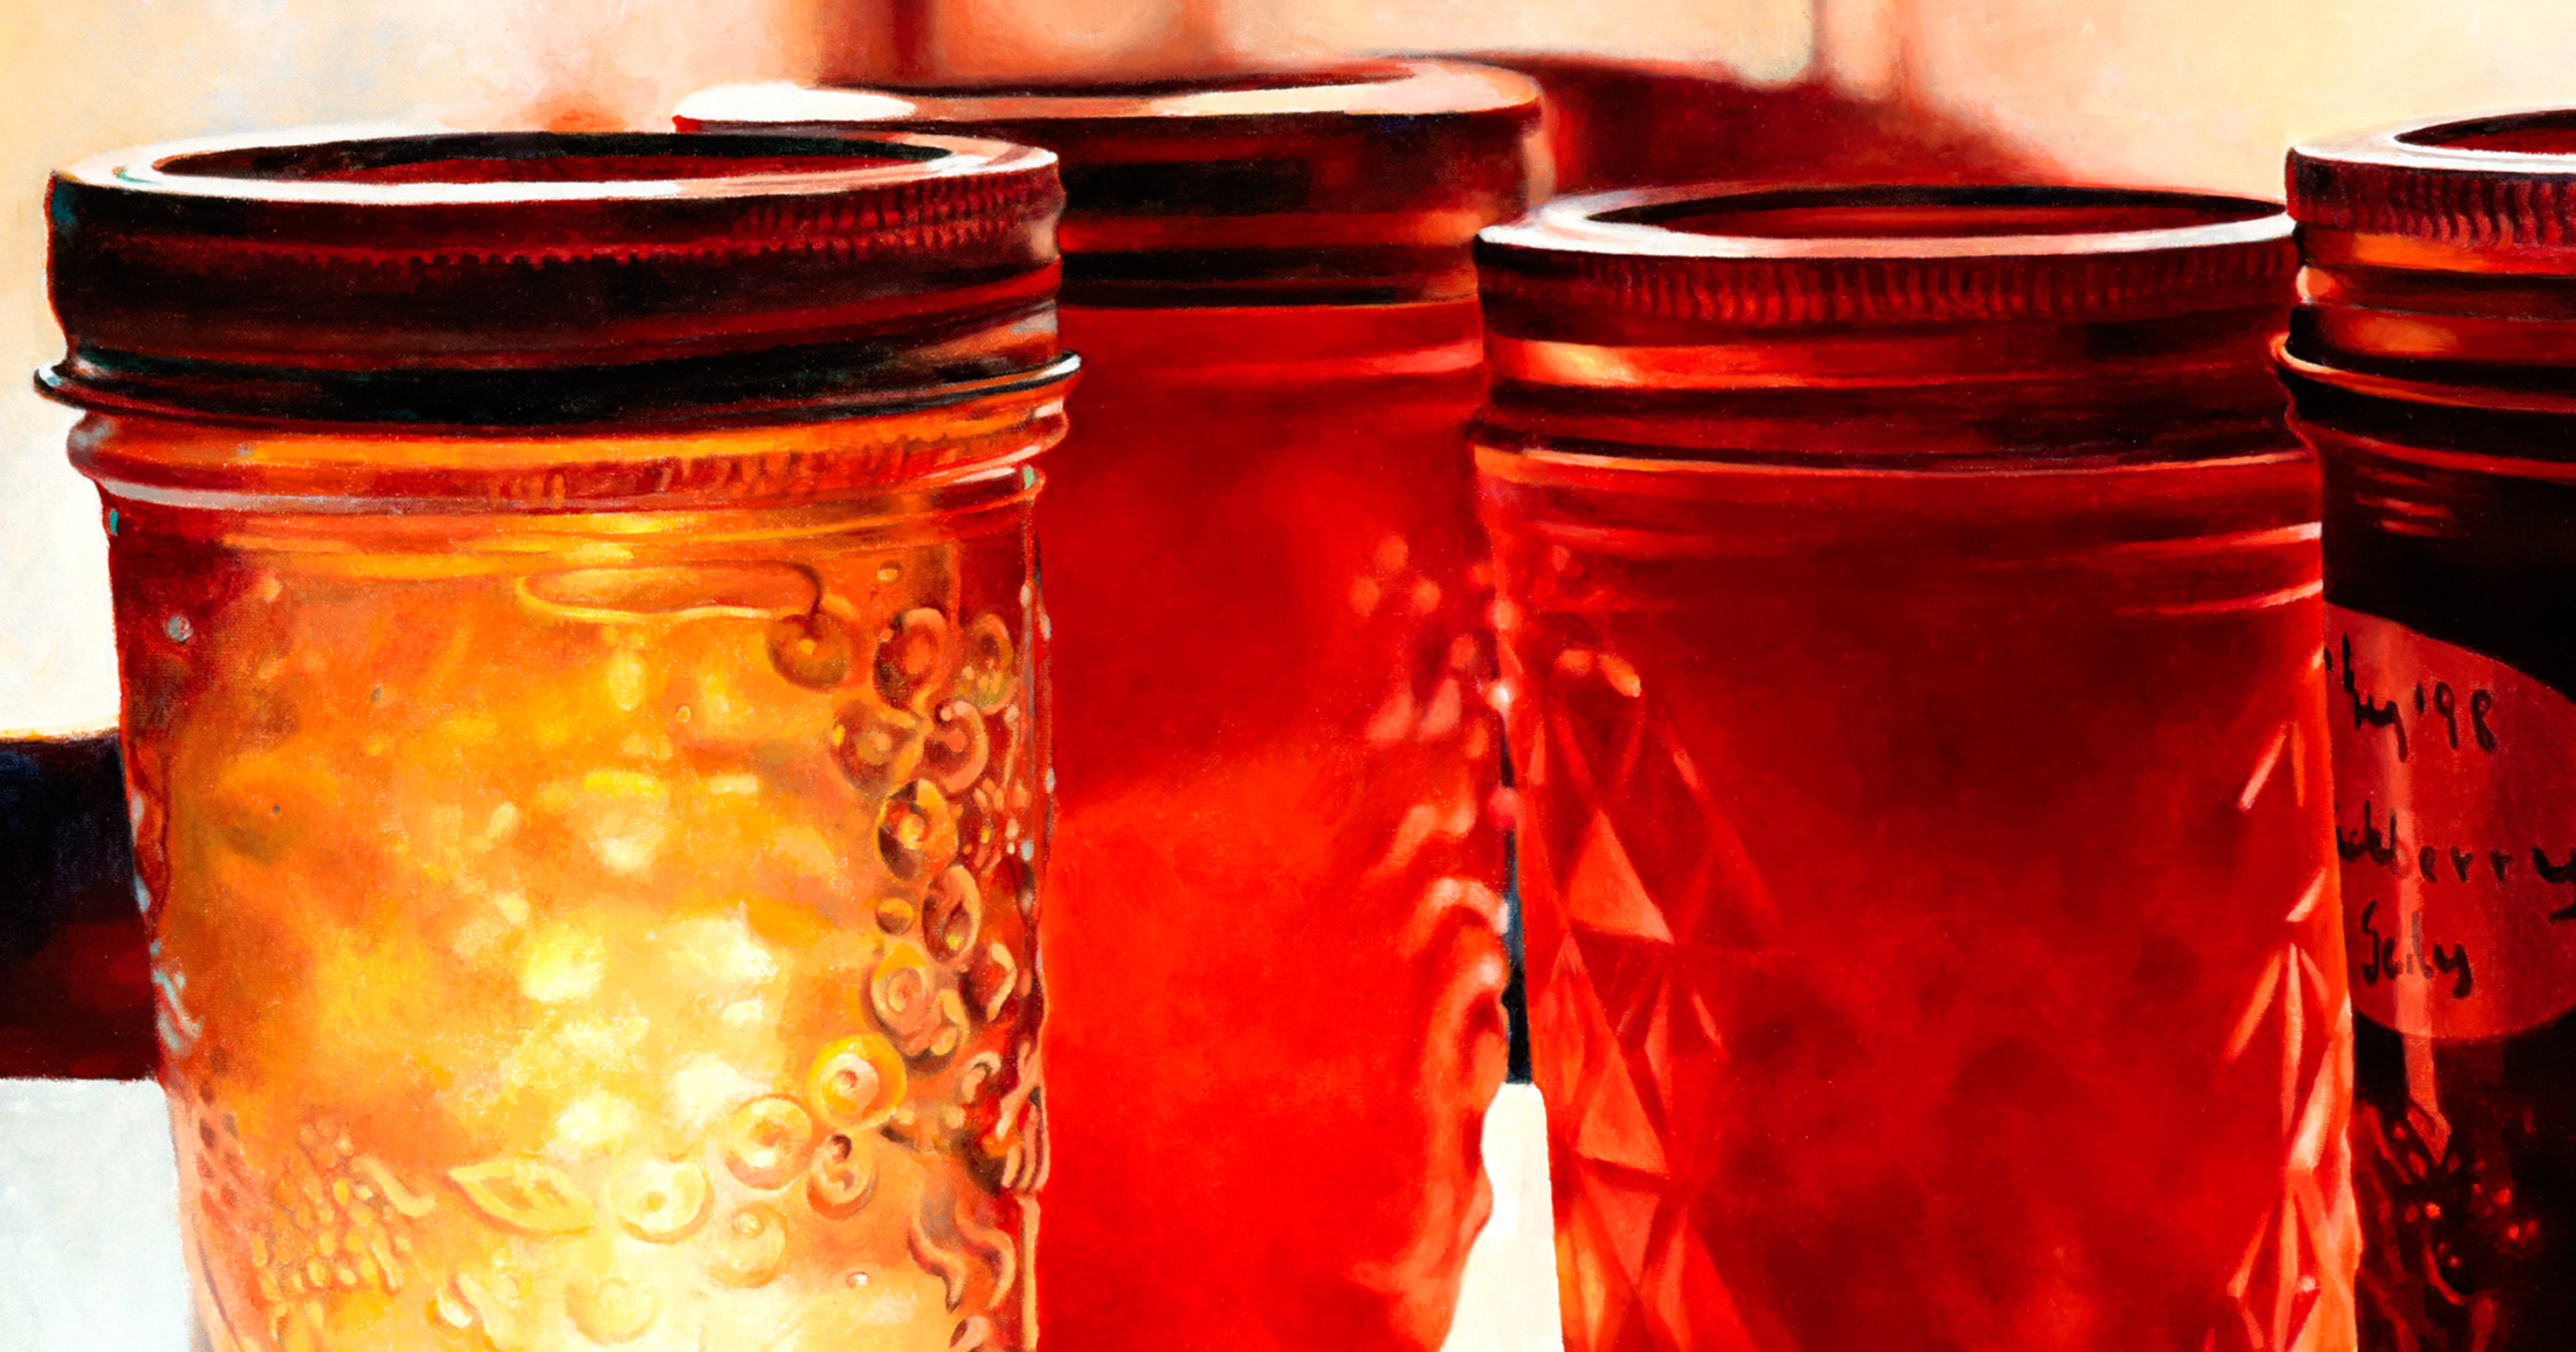 Four jars of coloured jellies sitting on a table with sunlight coming from behind.